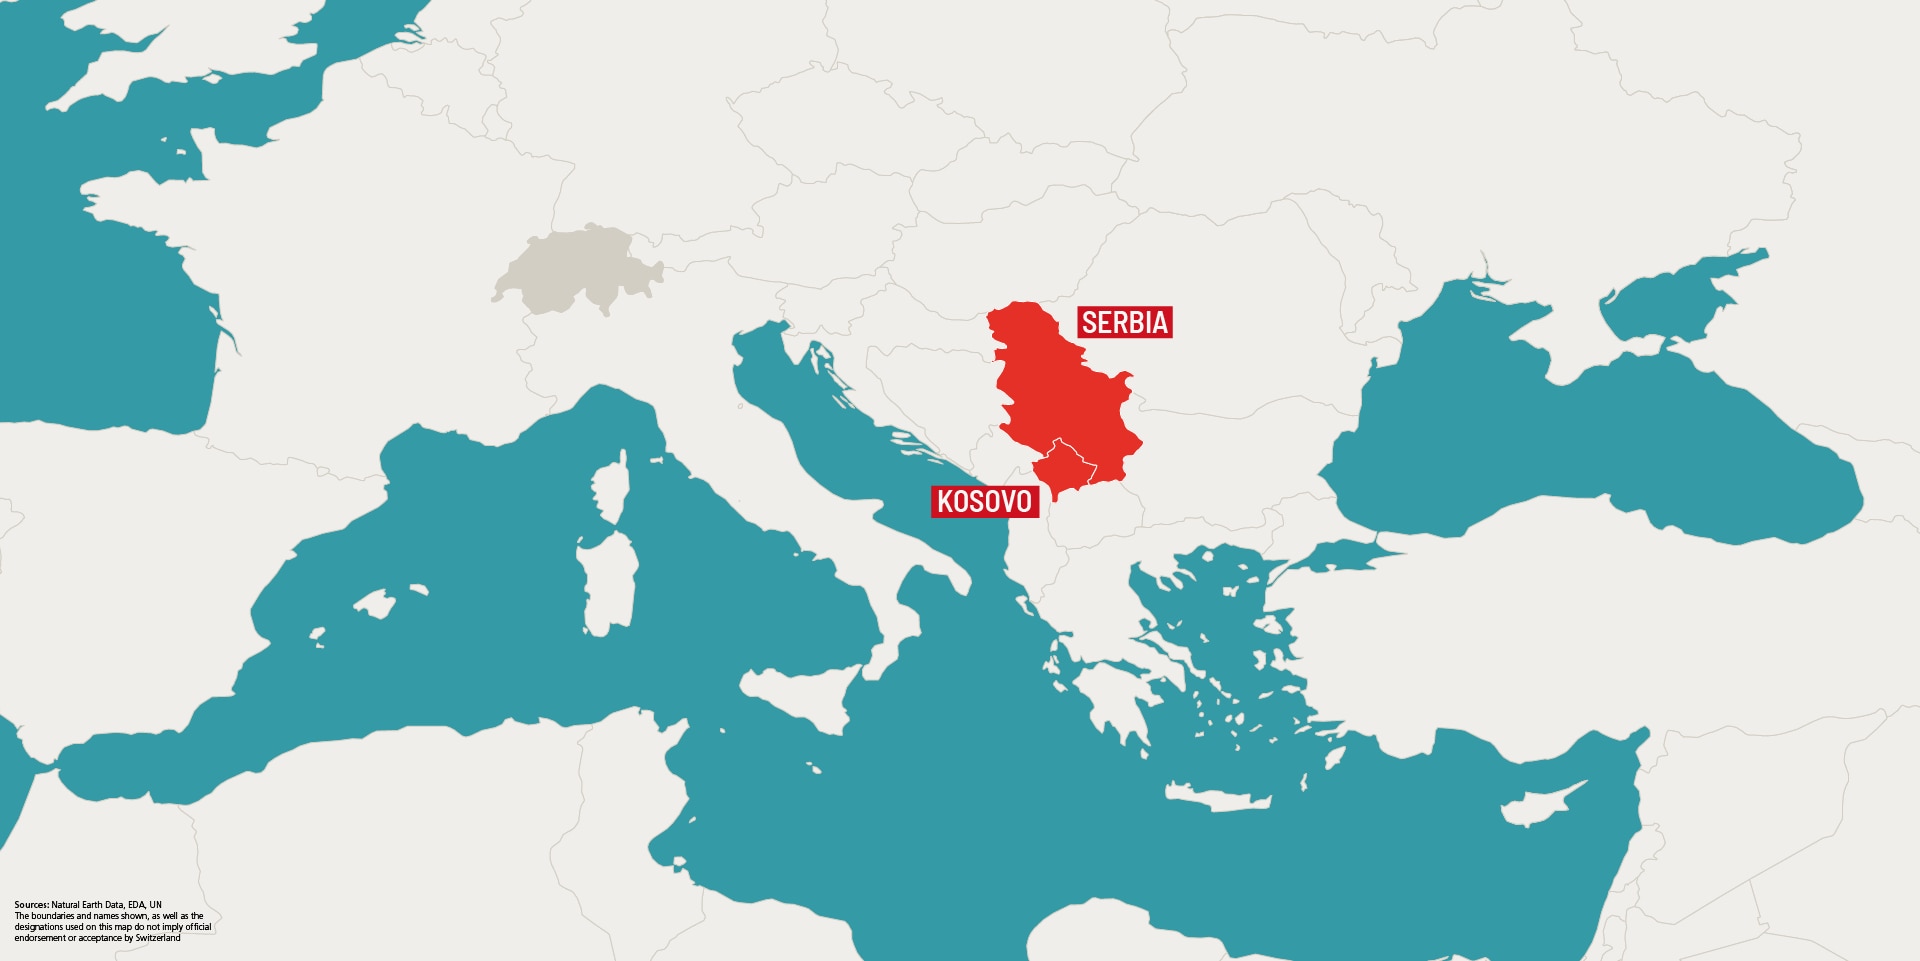 A map shows the borders between Serbia and Kosovo.